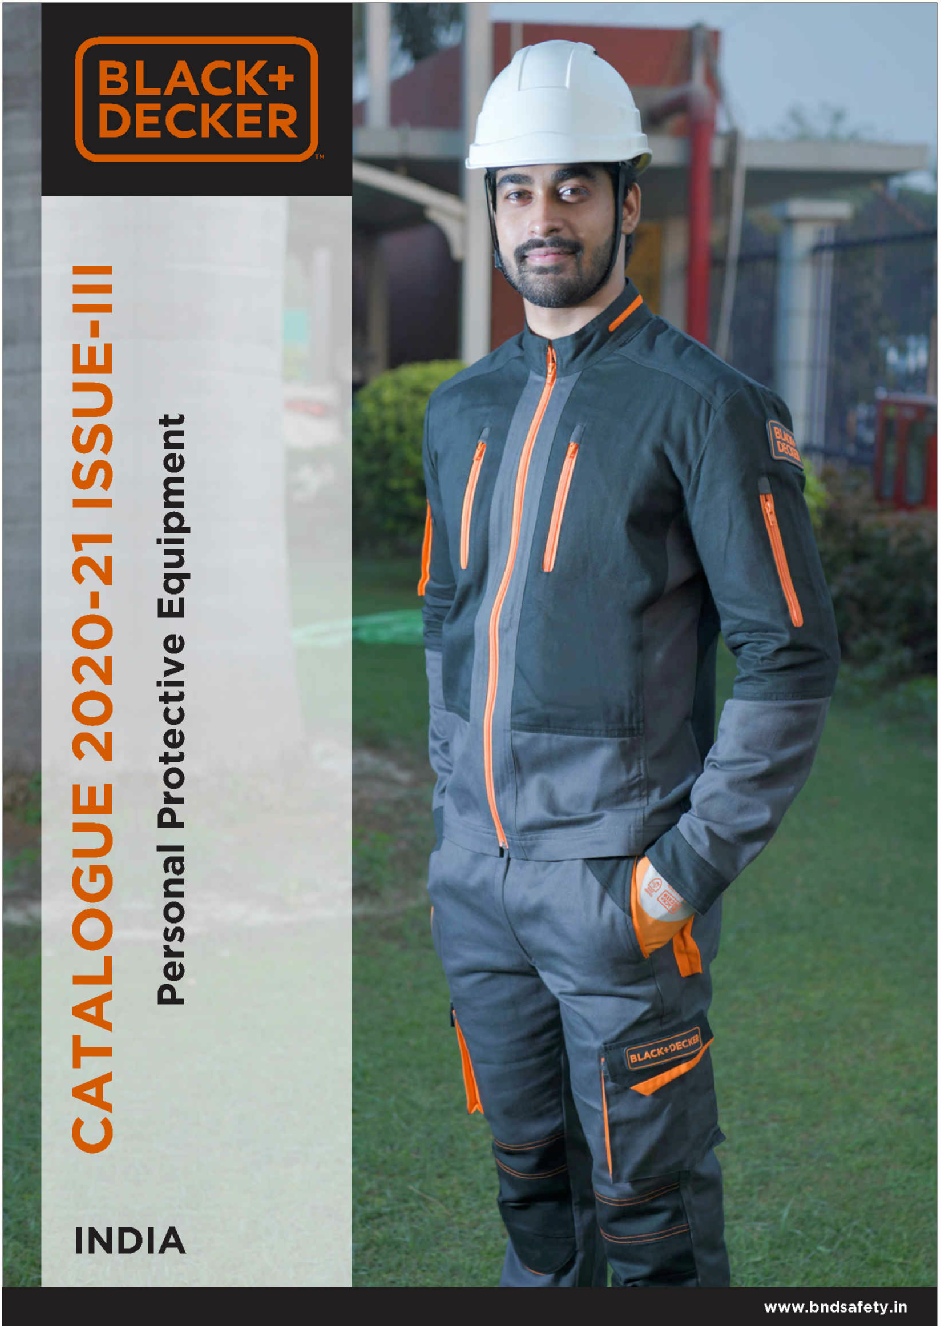 black-decker-safetyproduct-PPE-INDIA